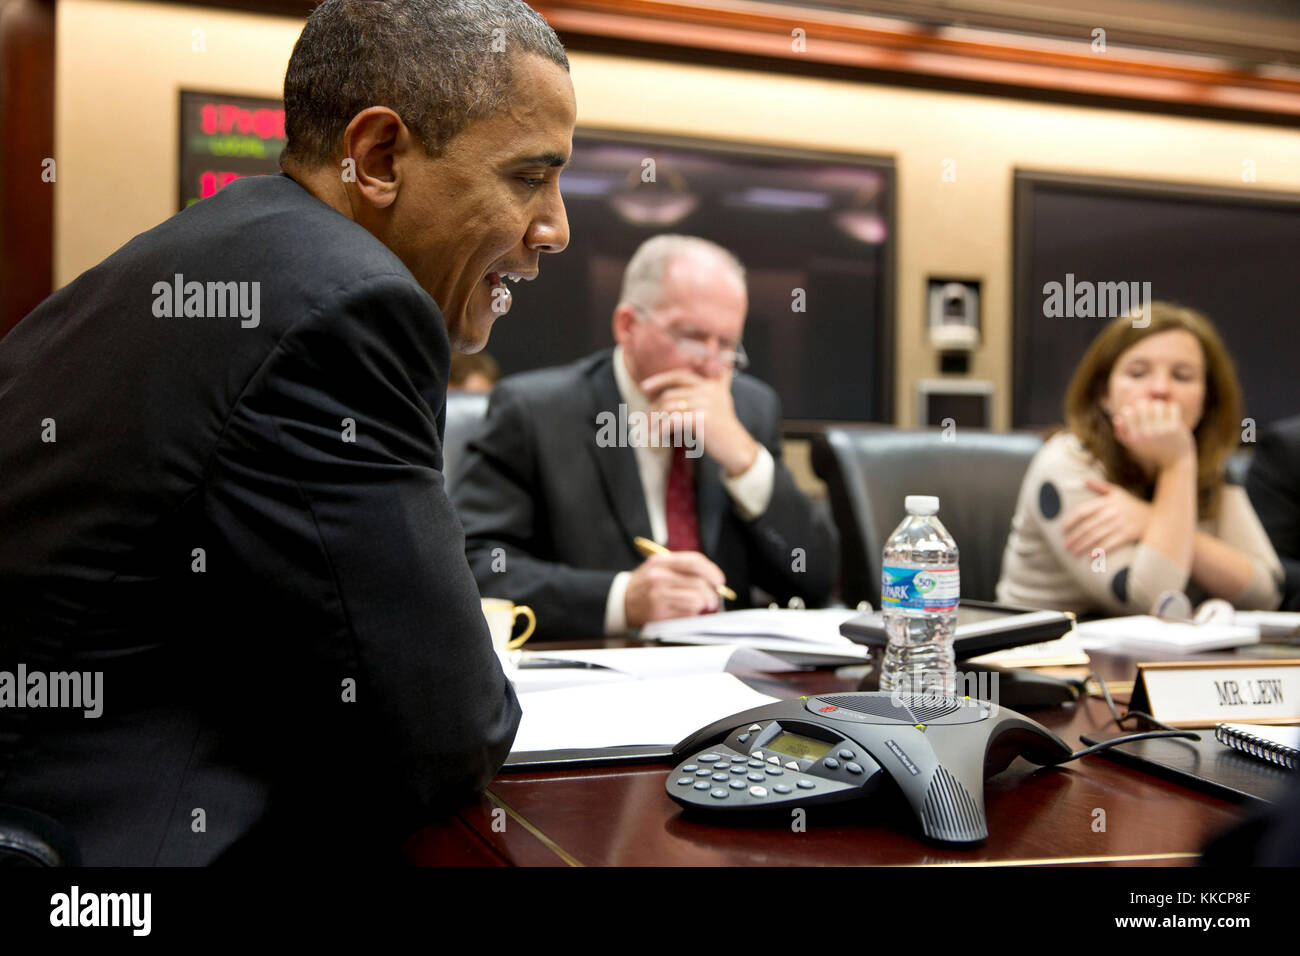 President Barack Obama participates in a conference call with electric utility executives to discuss the restoration of power for those who lost electricity during Hurrican Sandy, in the Situation Room of the White House, Oct. 30, 2012. John Brennan, Assistant to the President for Homeland Security and Counterterrorism, and Alyssa Mastromonaco, Deputy Chief of Staff for Ops, listen at right. (Official White House Photo by Pete Souza)  This official White House photograph is being made available only for publication by news organizations and/or for personal use printing by the subject(s) of the Stock Photo